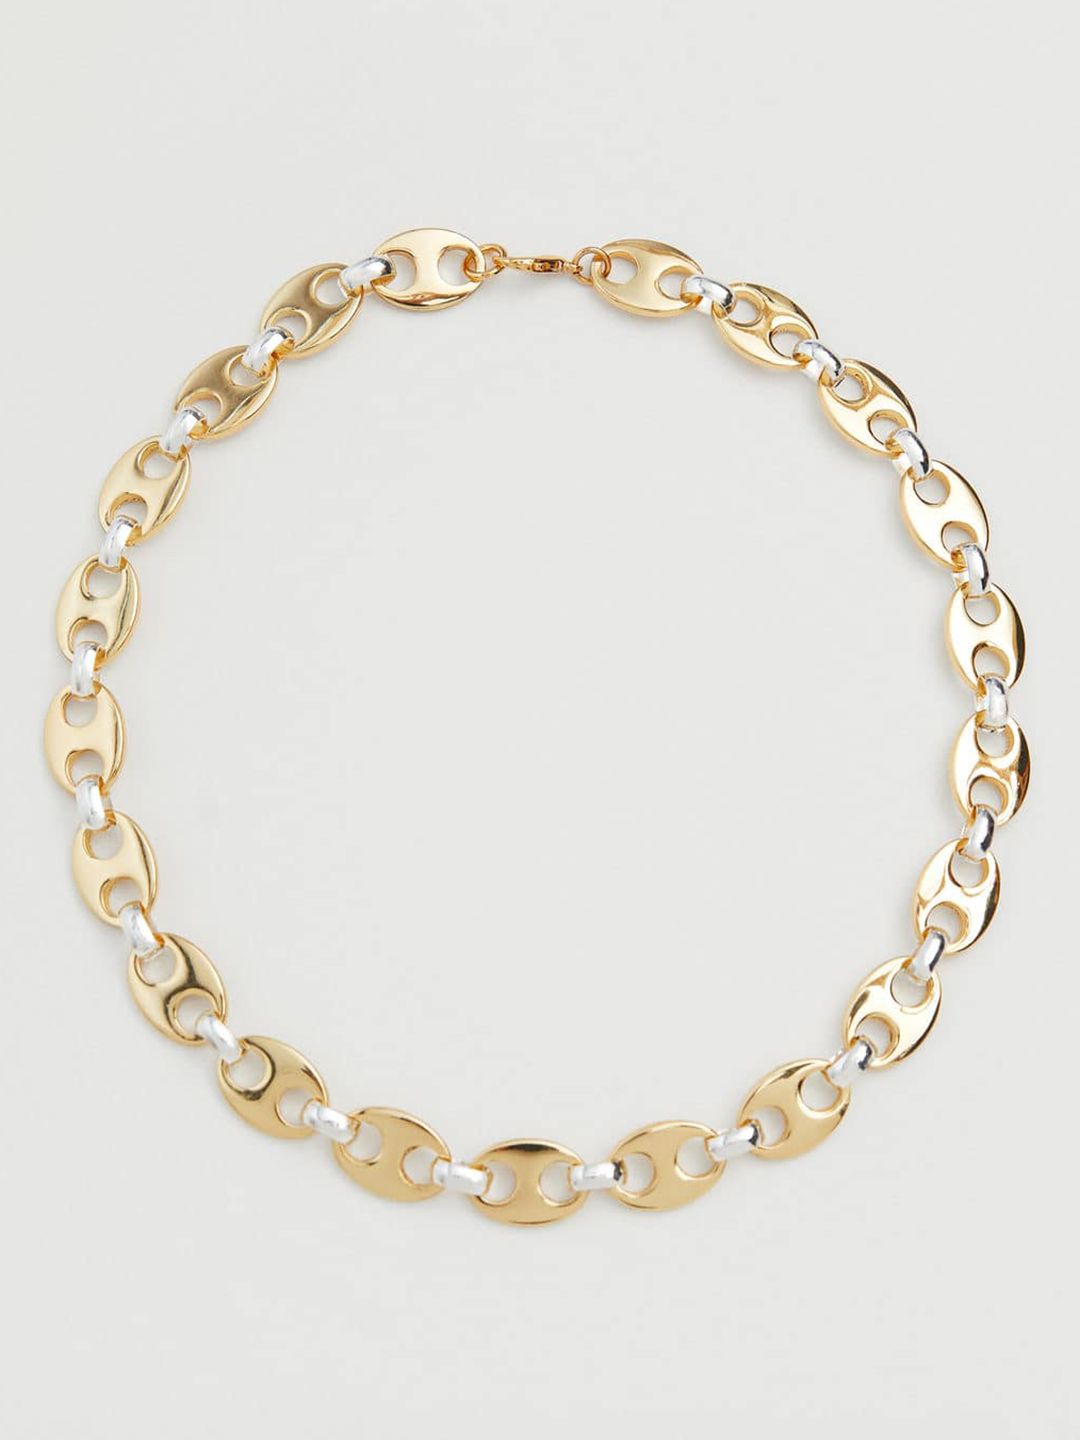 MANGO Women Gold-Toned & Silver-Toned Linked Chain Necklace Price in India